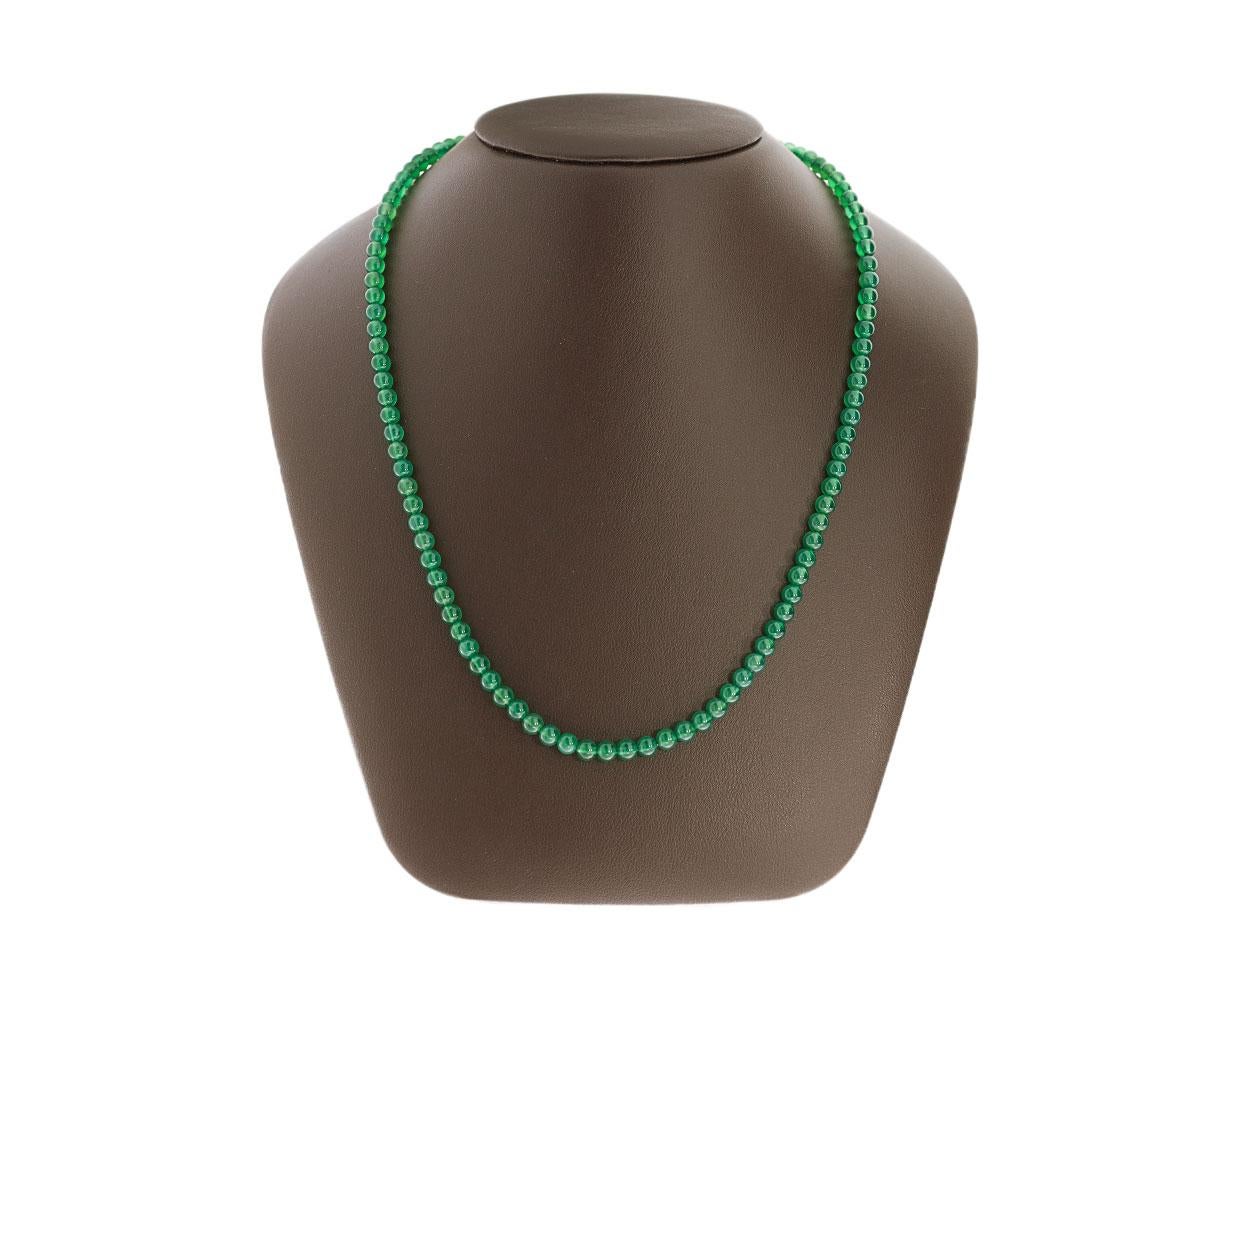 Item Details:
Main Stone Shape - Polished Bead
Main Stone Creation - Natural
Main Stone - Onyx
Main Stone Color - Green
Estimated Retail - $465.00
Brand - David Yurman
Collection - Spiritual Beads
Metal - Sterling Silver
Style - Strand or String